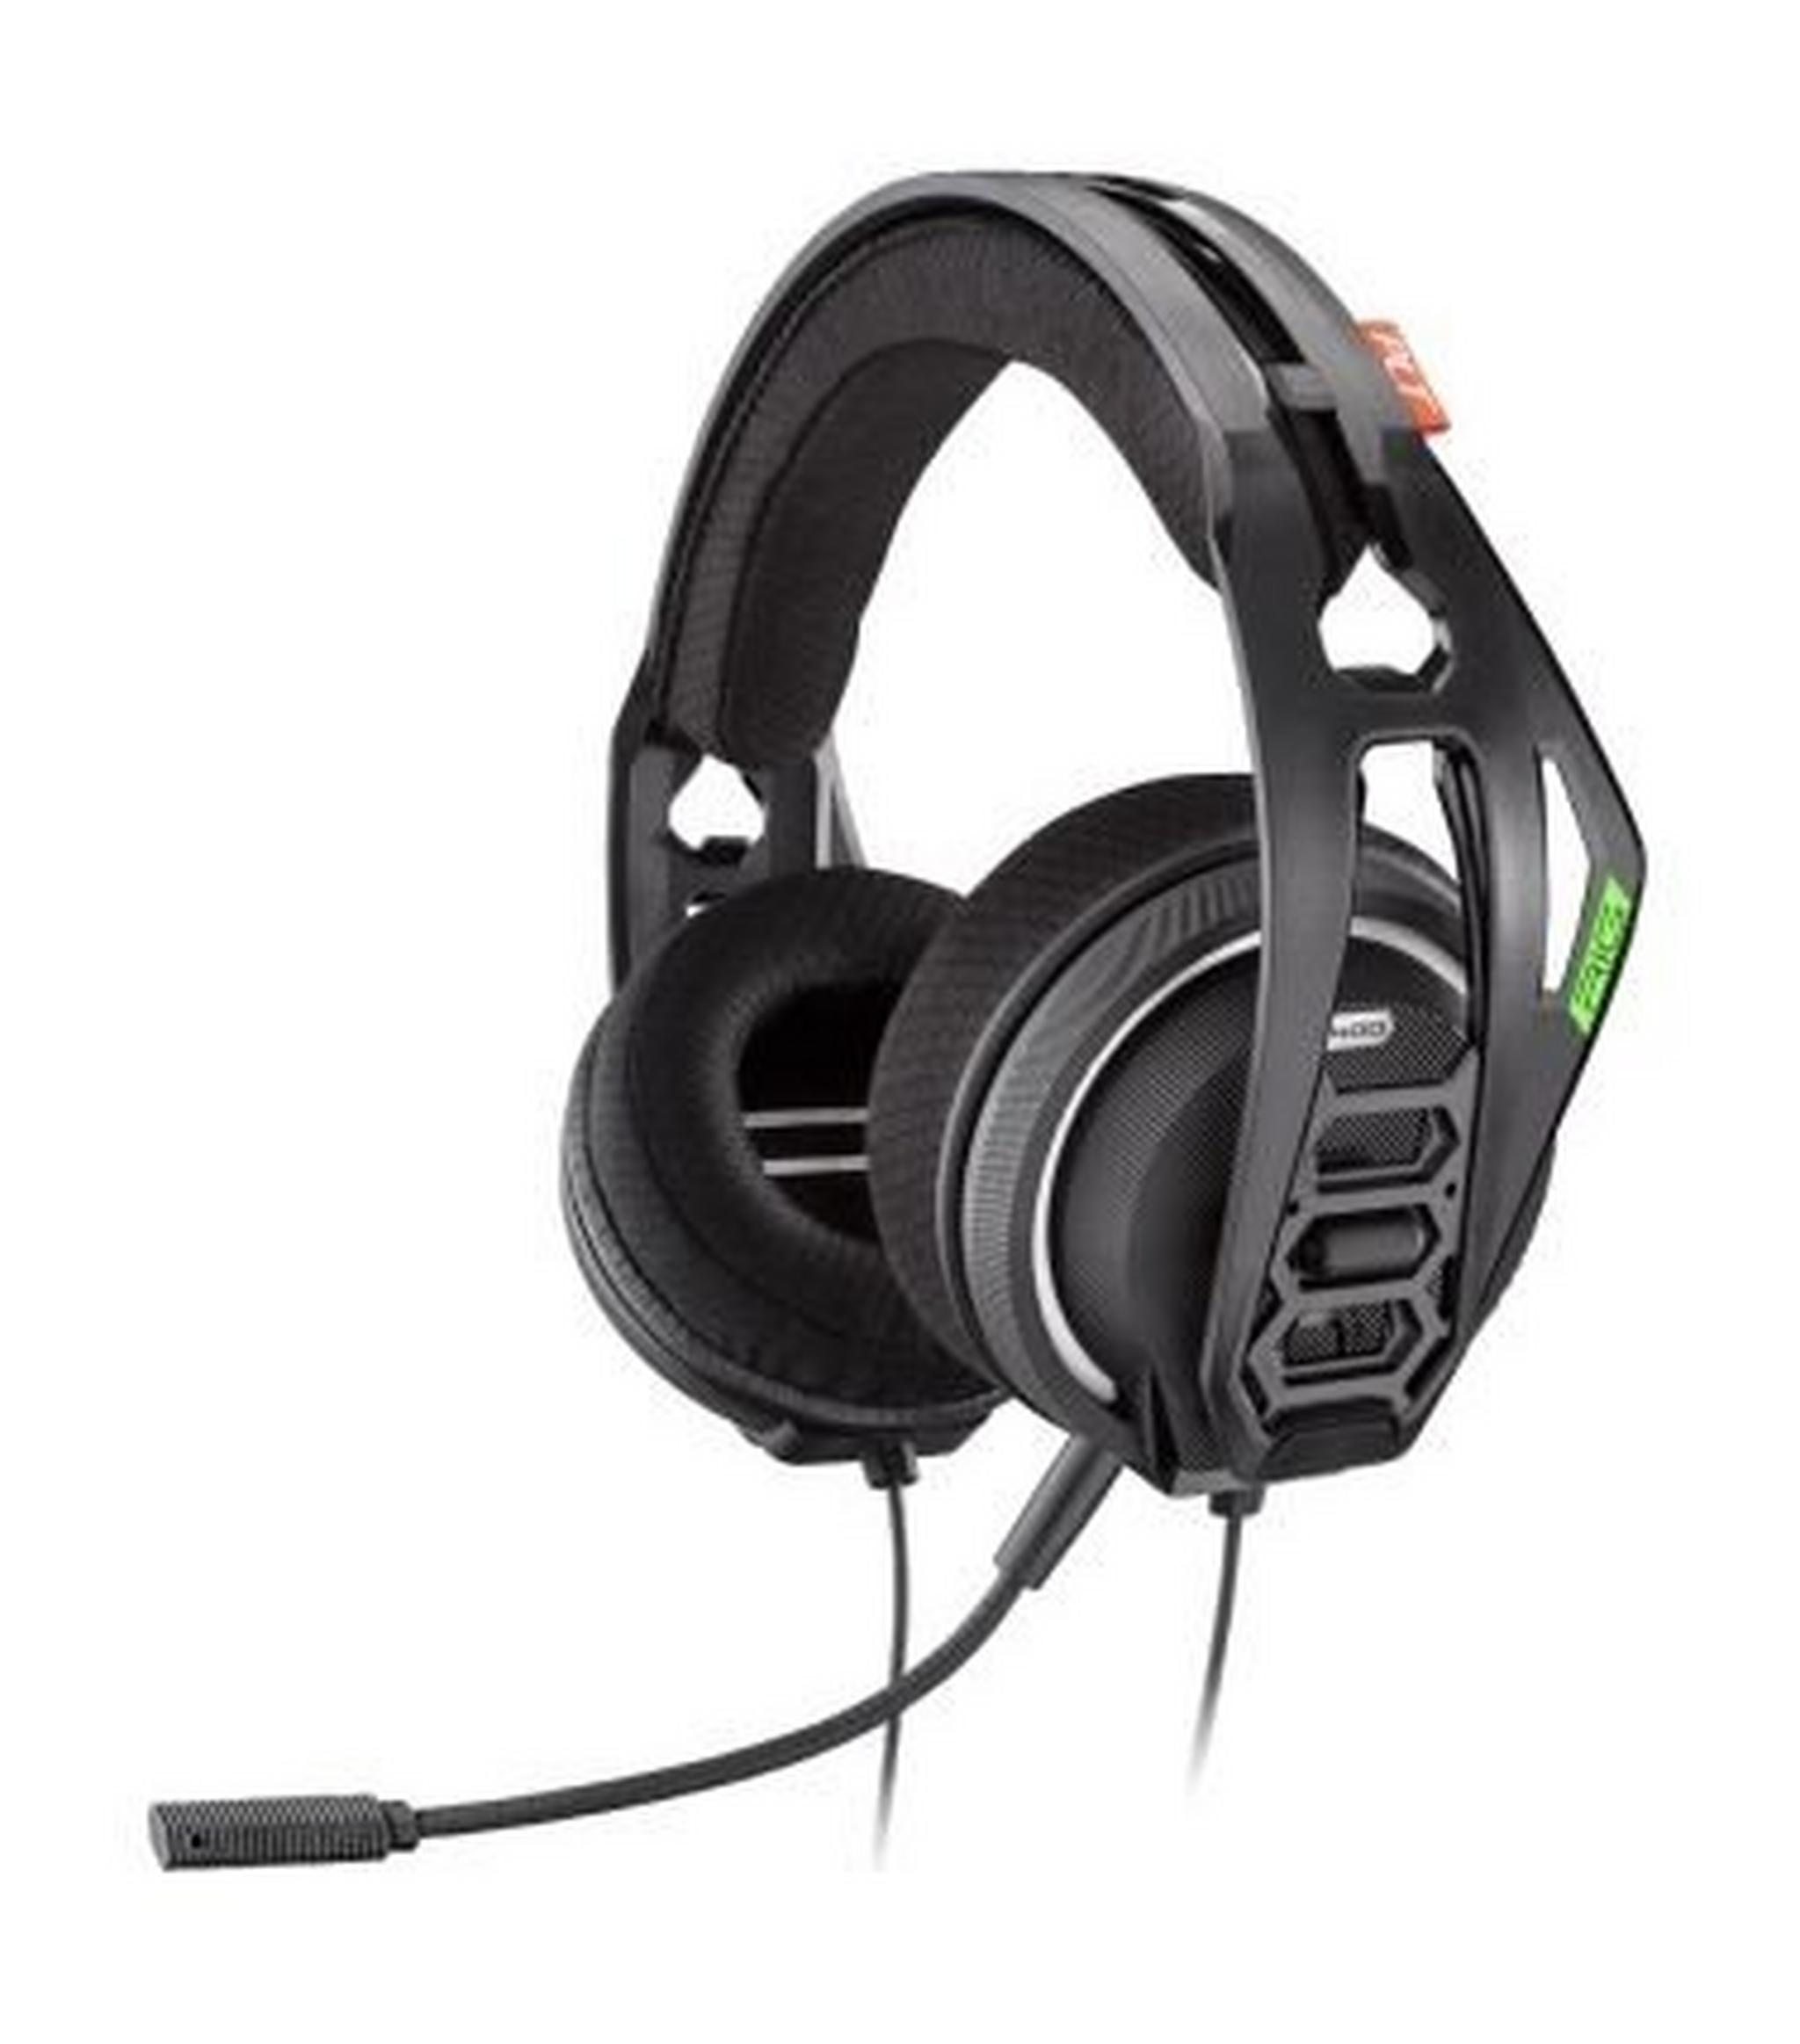 Plantronics RIG 400HX Gaming Headset for Xbox One